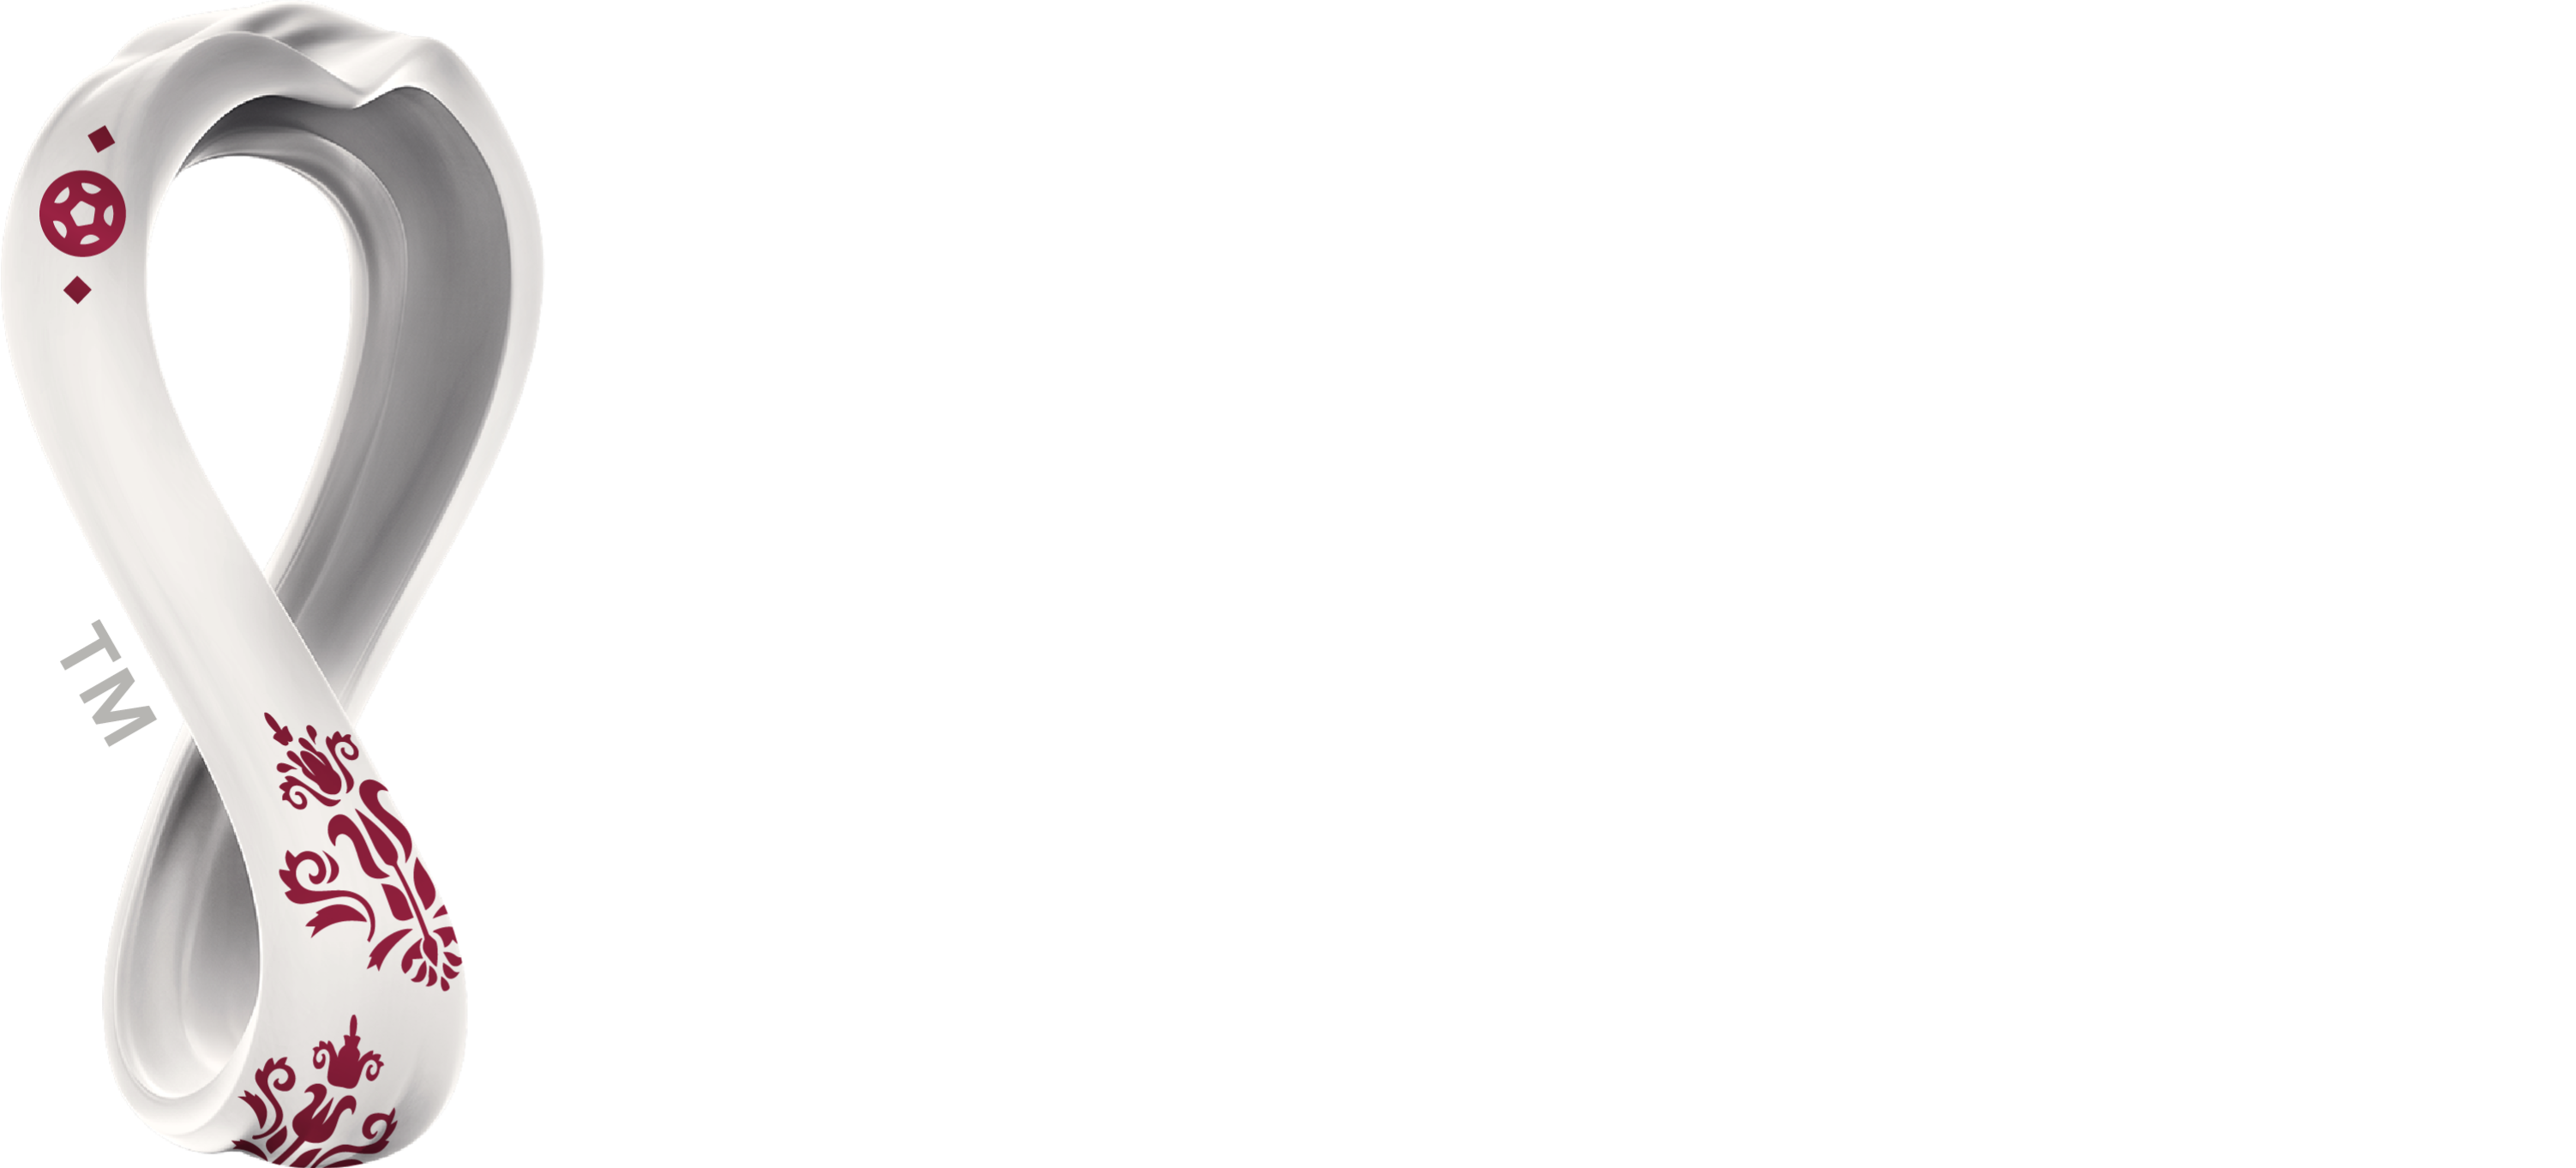 fifa world cup 2022 official website